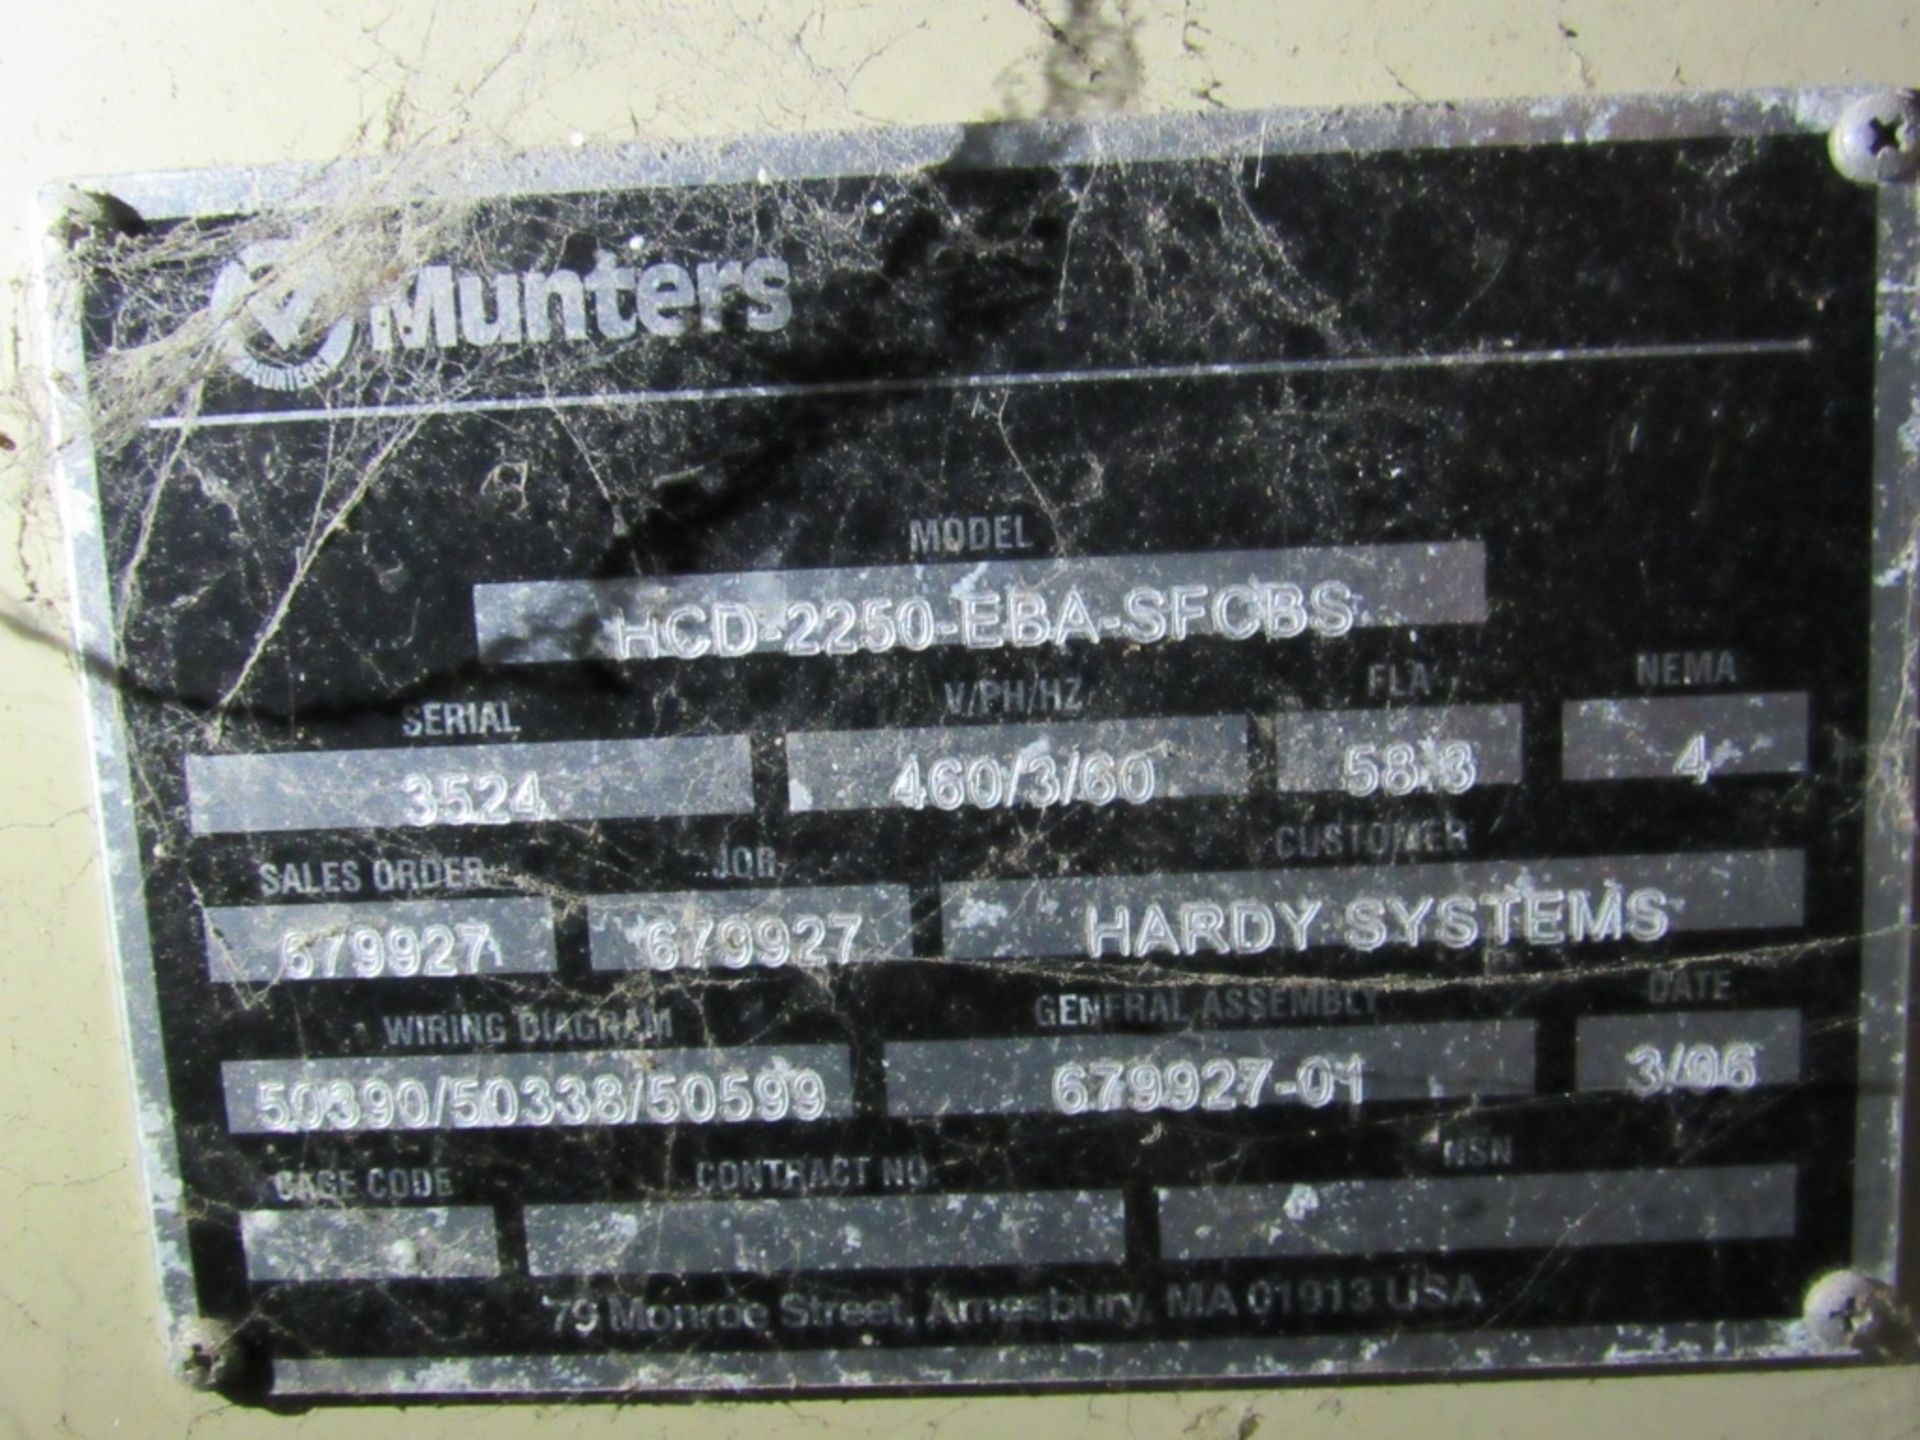 Munters Dehumidifier- Model - HCD-2250-FBA-SFCBS Rigging Fee - $250.00 "TVA will disconnect and - Image 17 of 17